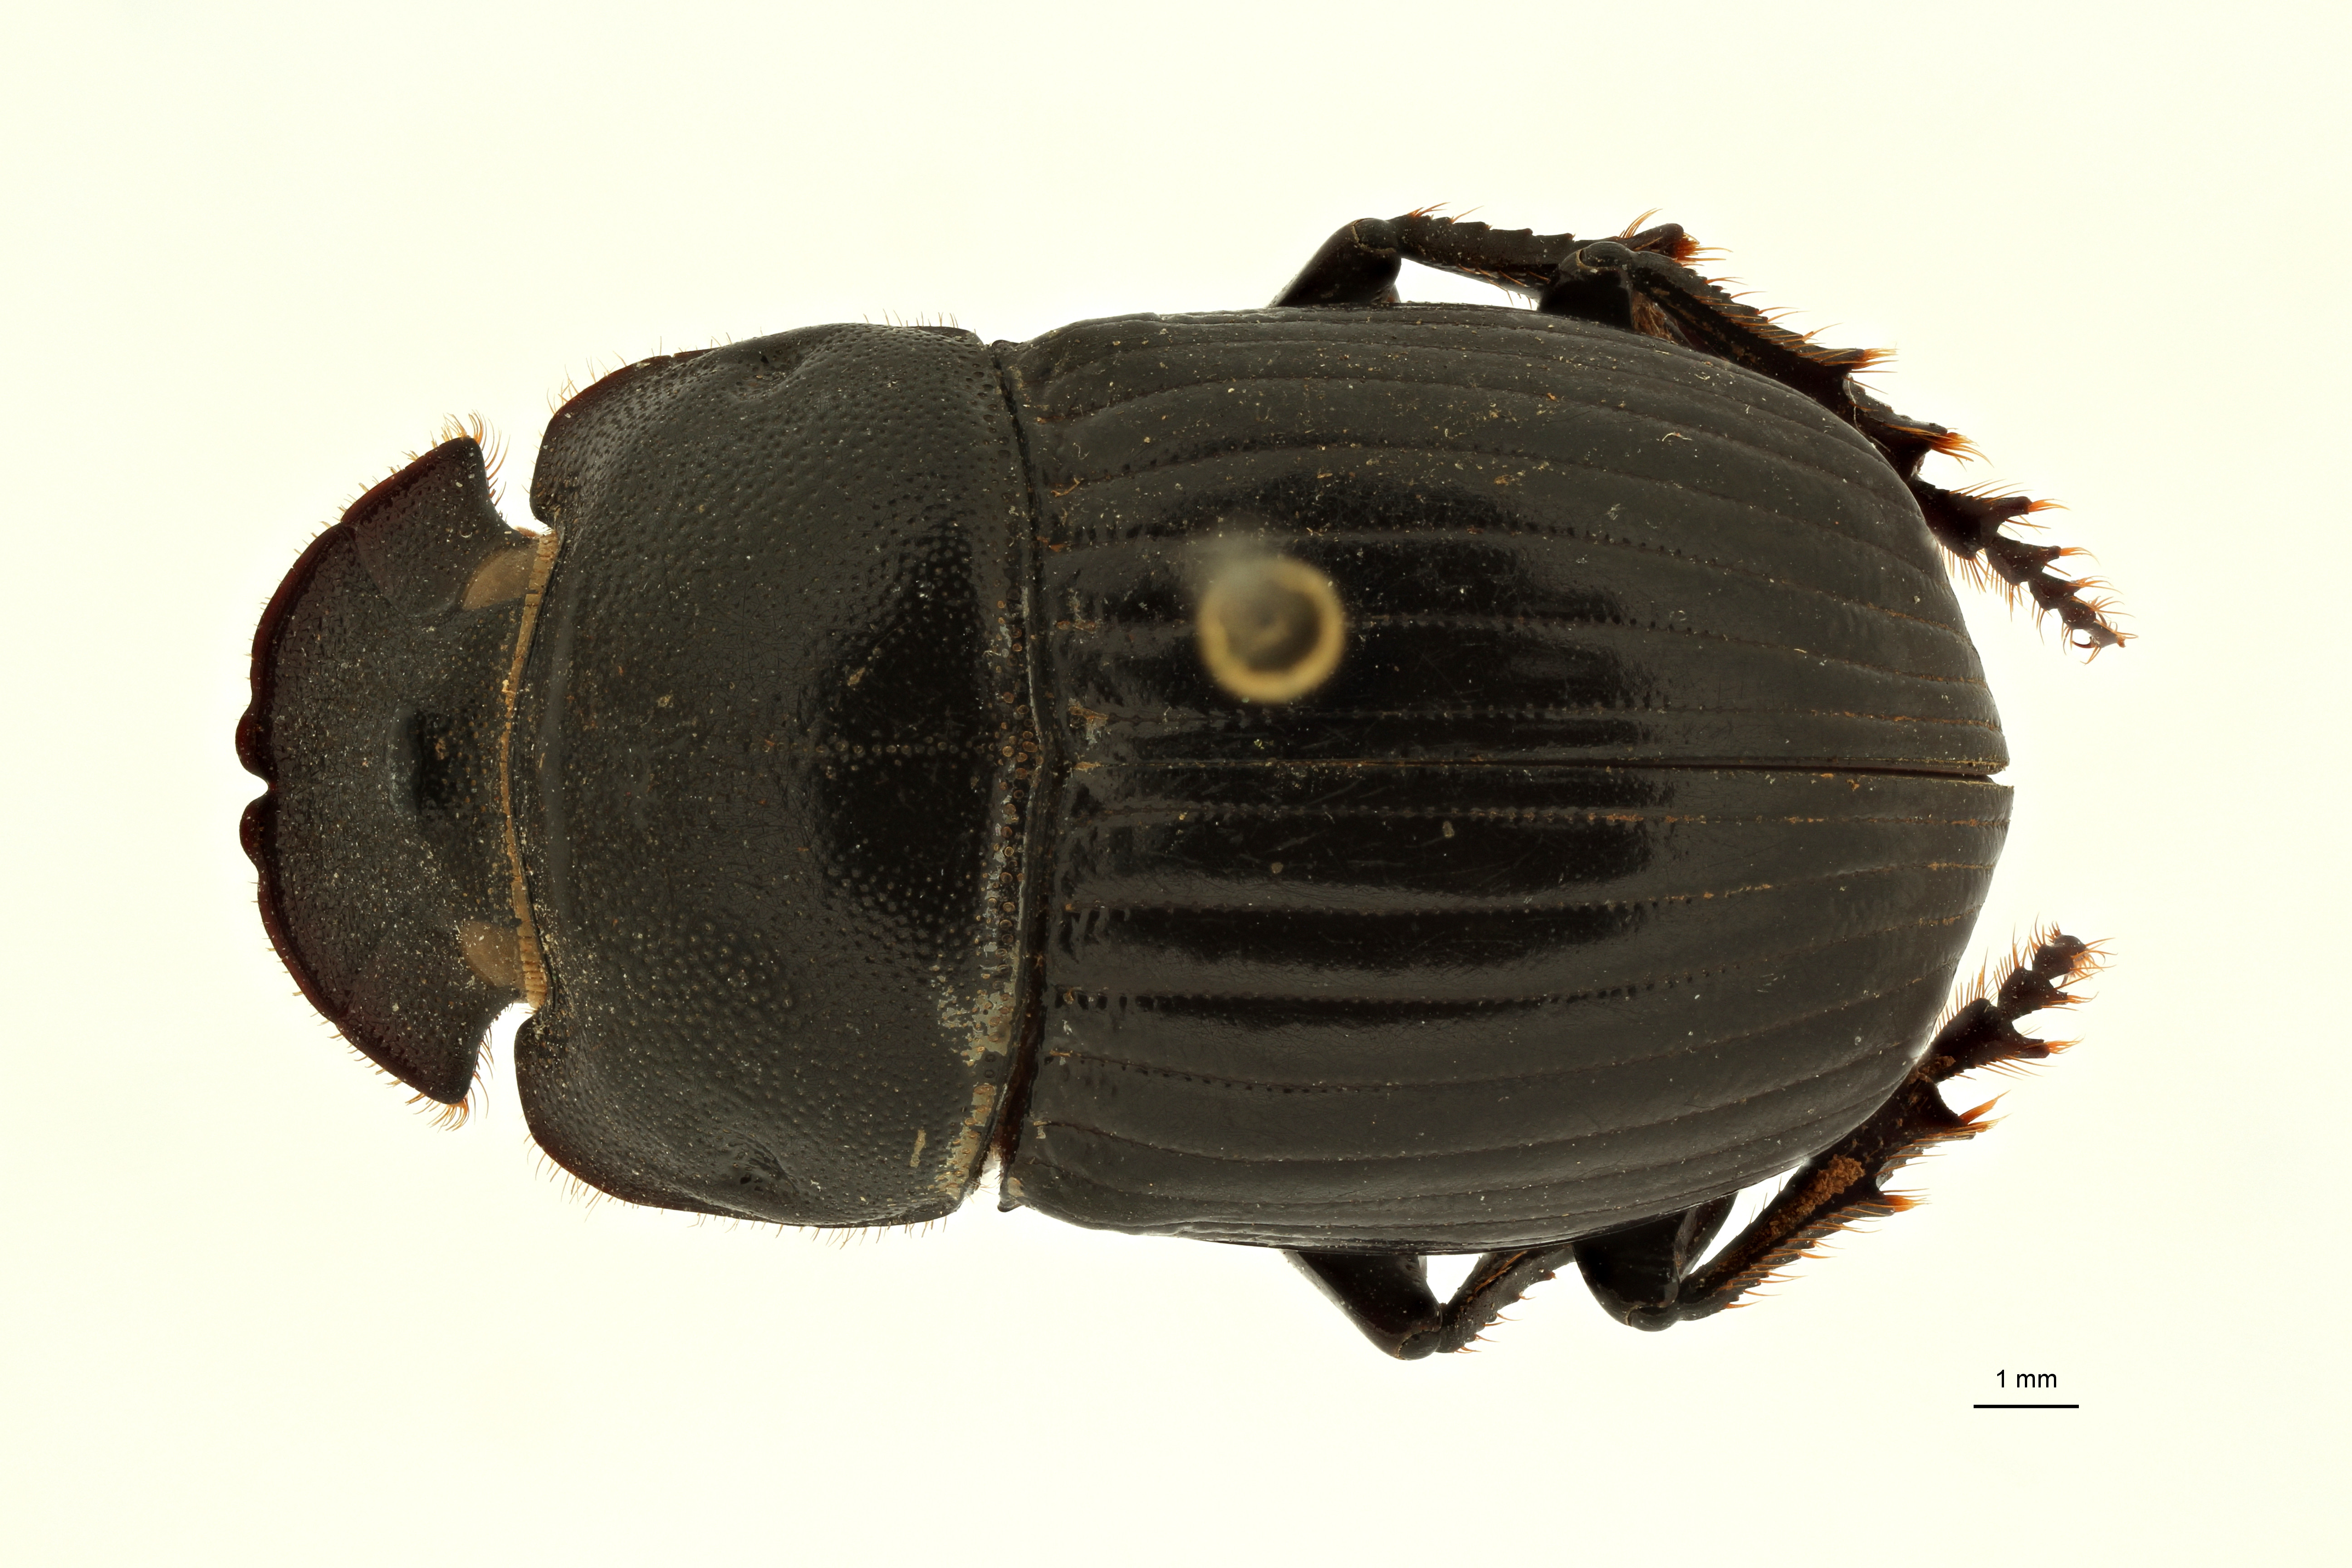 Copris carinicus st F D ZS PMax Scaled.jpeg